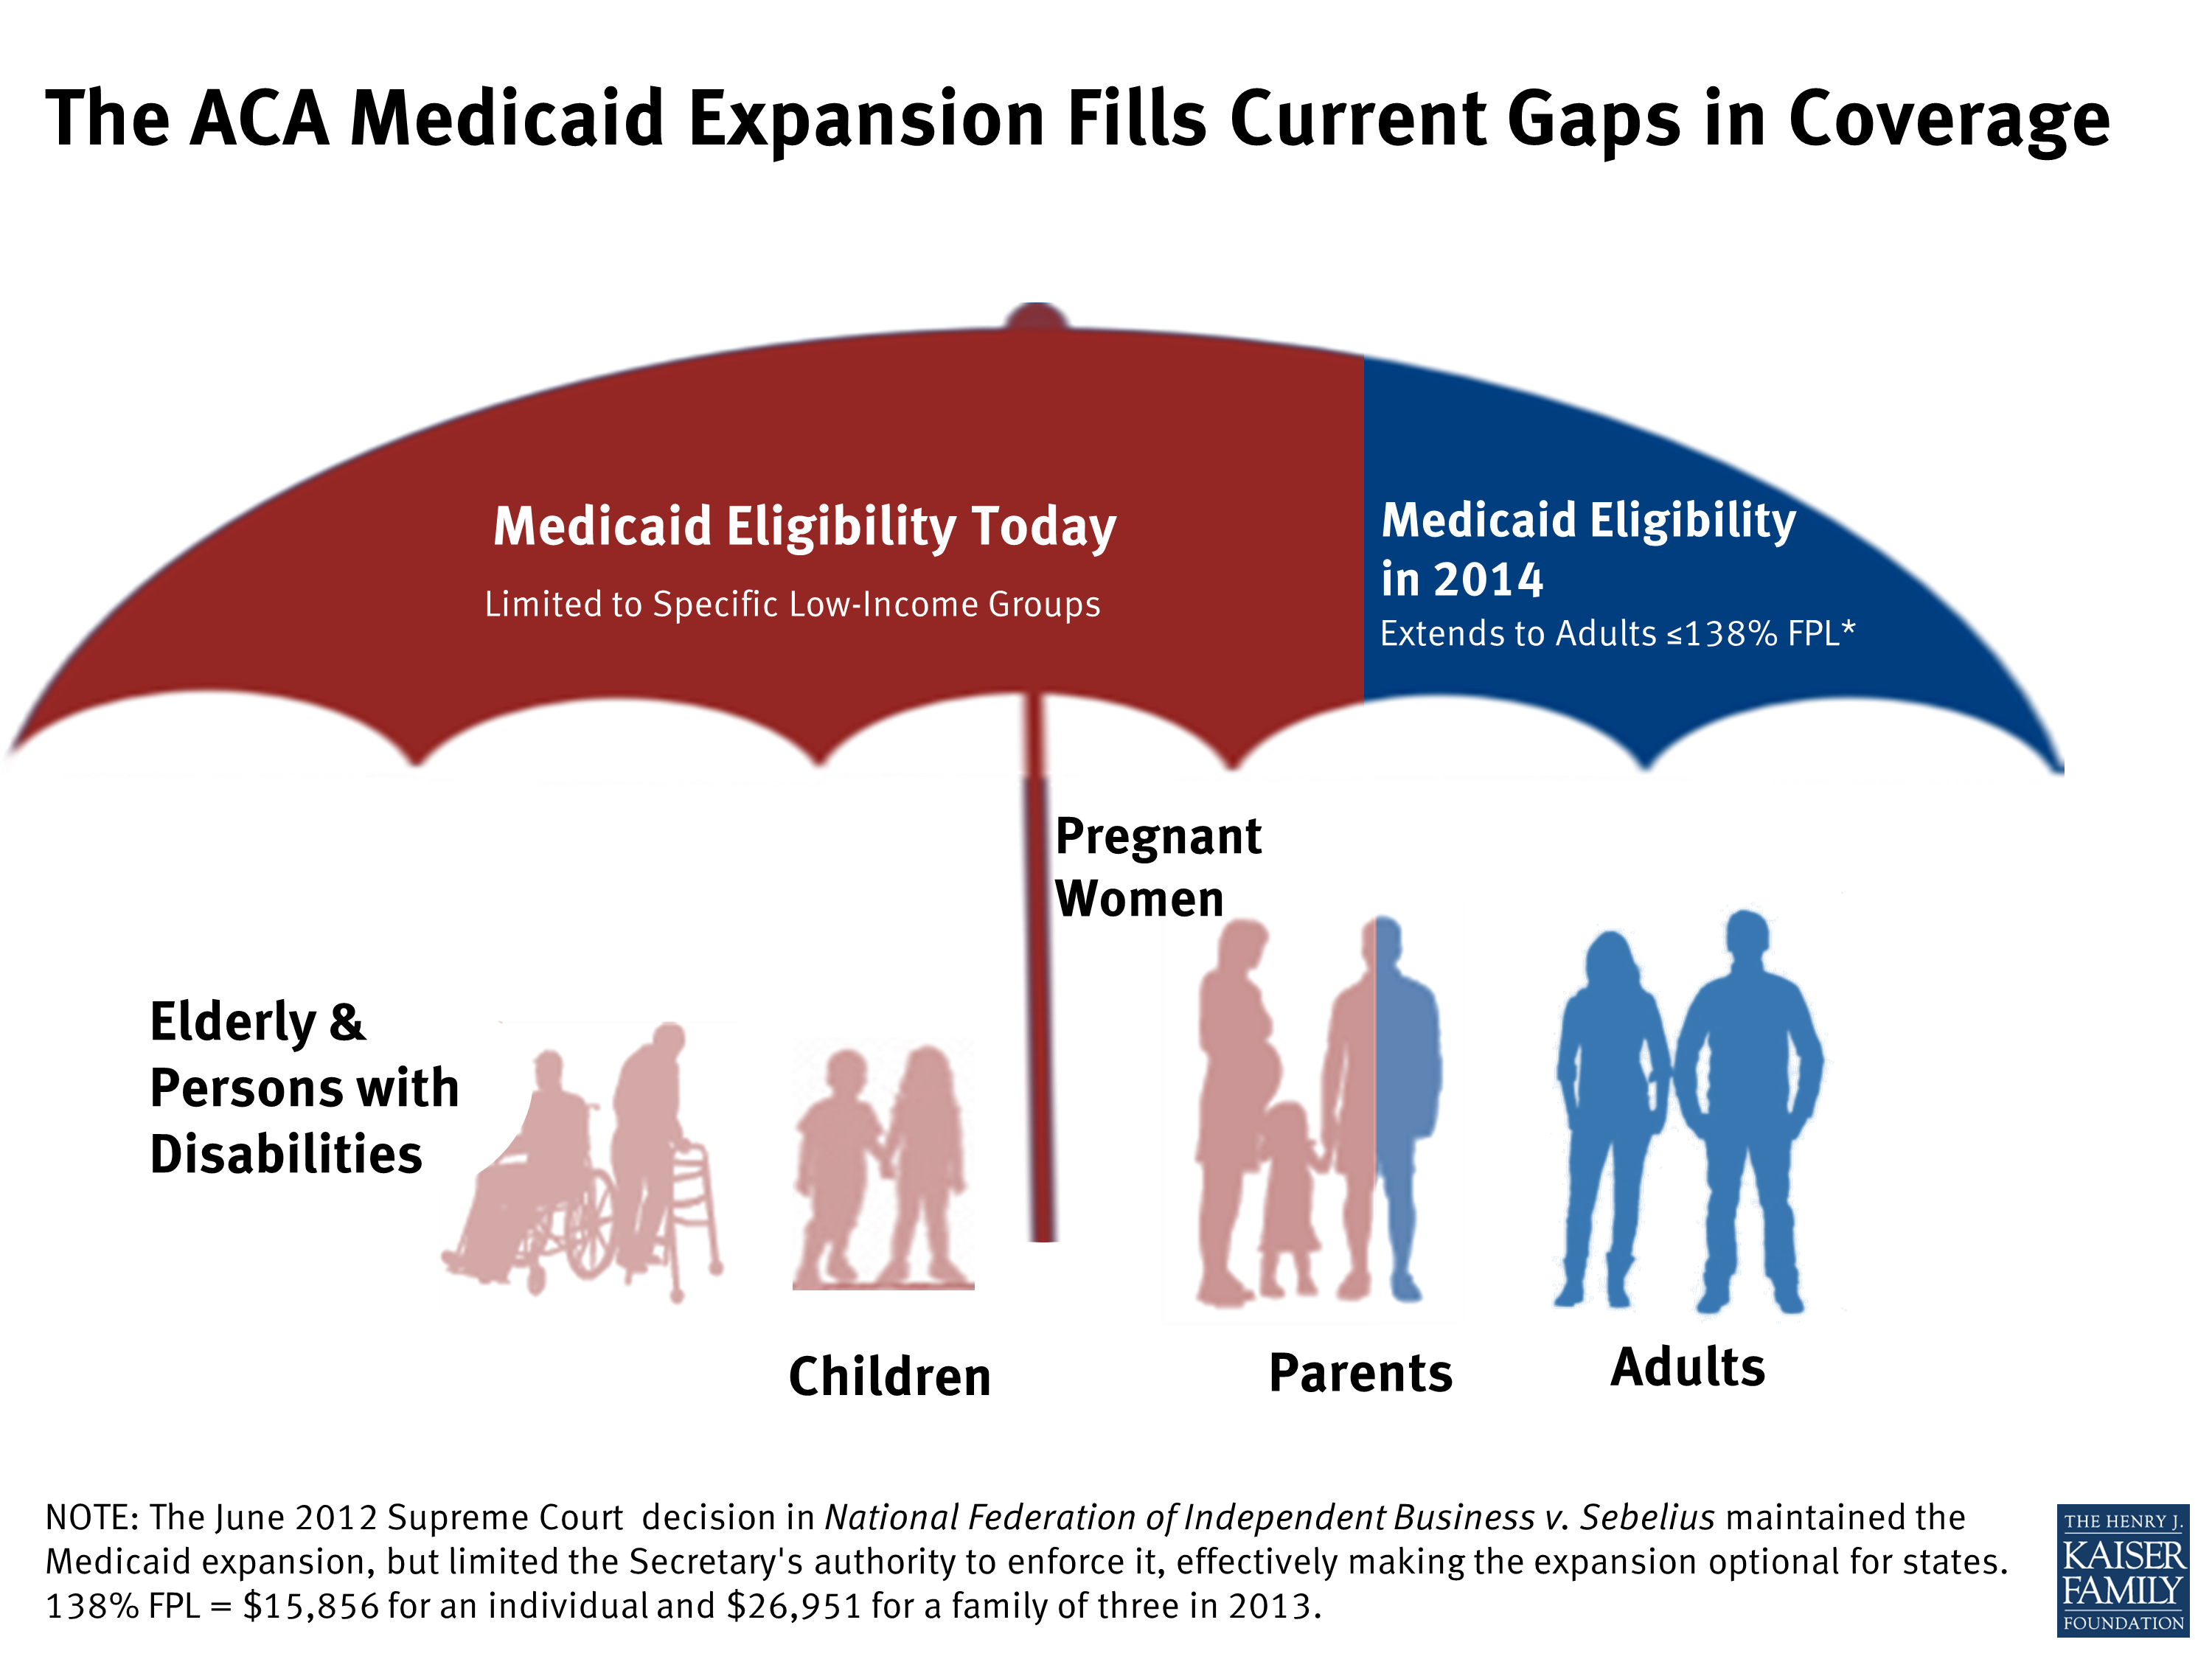 The ACA Medicaid Expansion Fills Current Gaps in Coverage